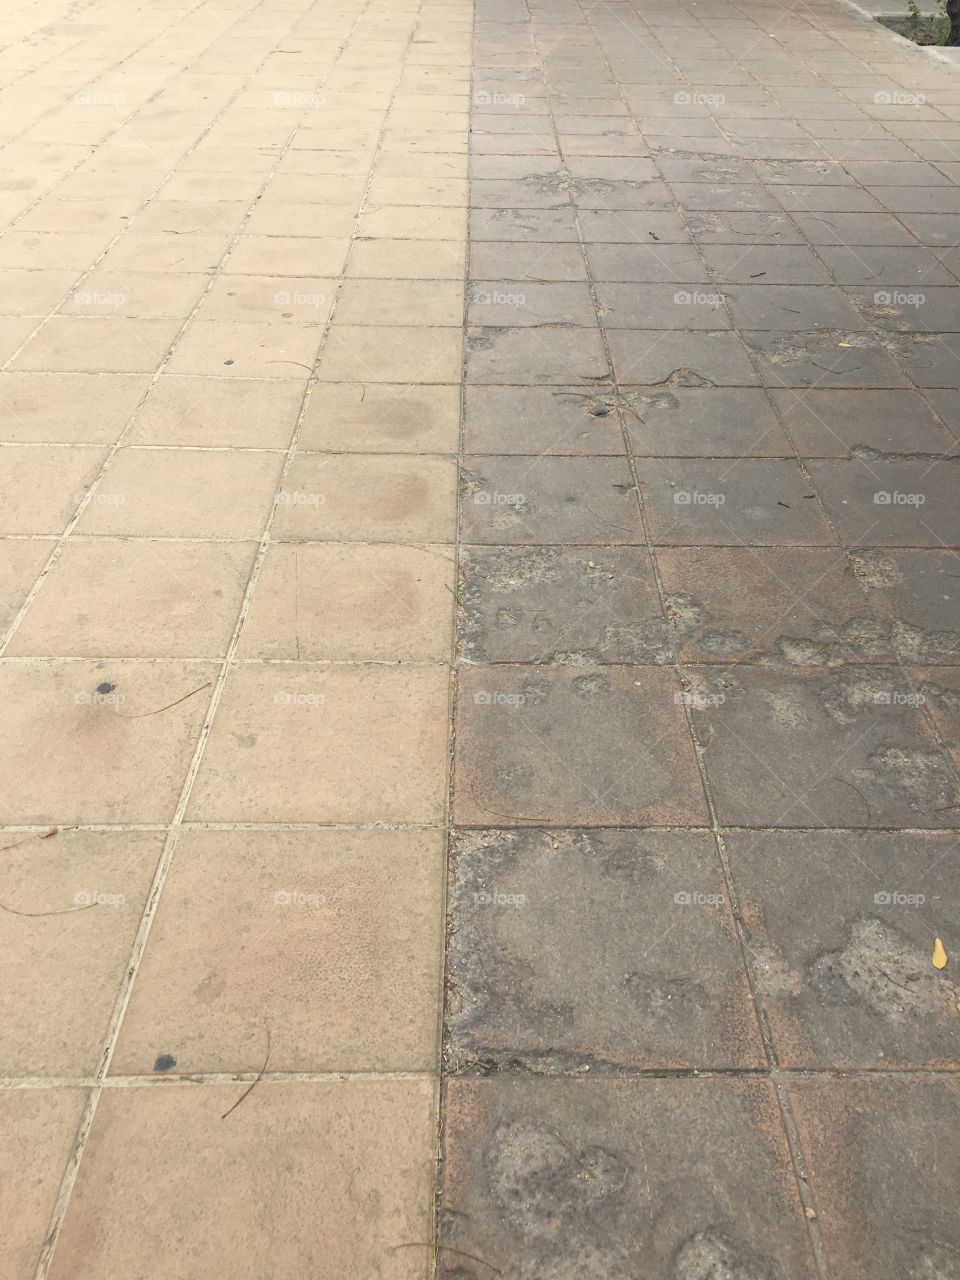 The old with the new, in this sidewalk the brownish dark tiles lay side by side with the new tiles that replaced the old ones. Next to each other you can see the difference between the weathered tiles and the new ones and their colors pop.